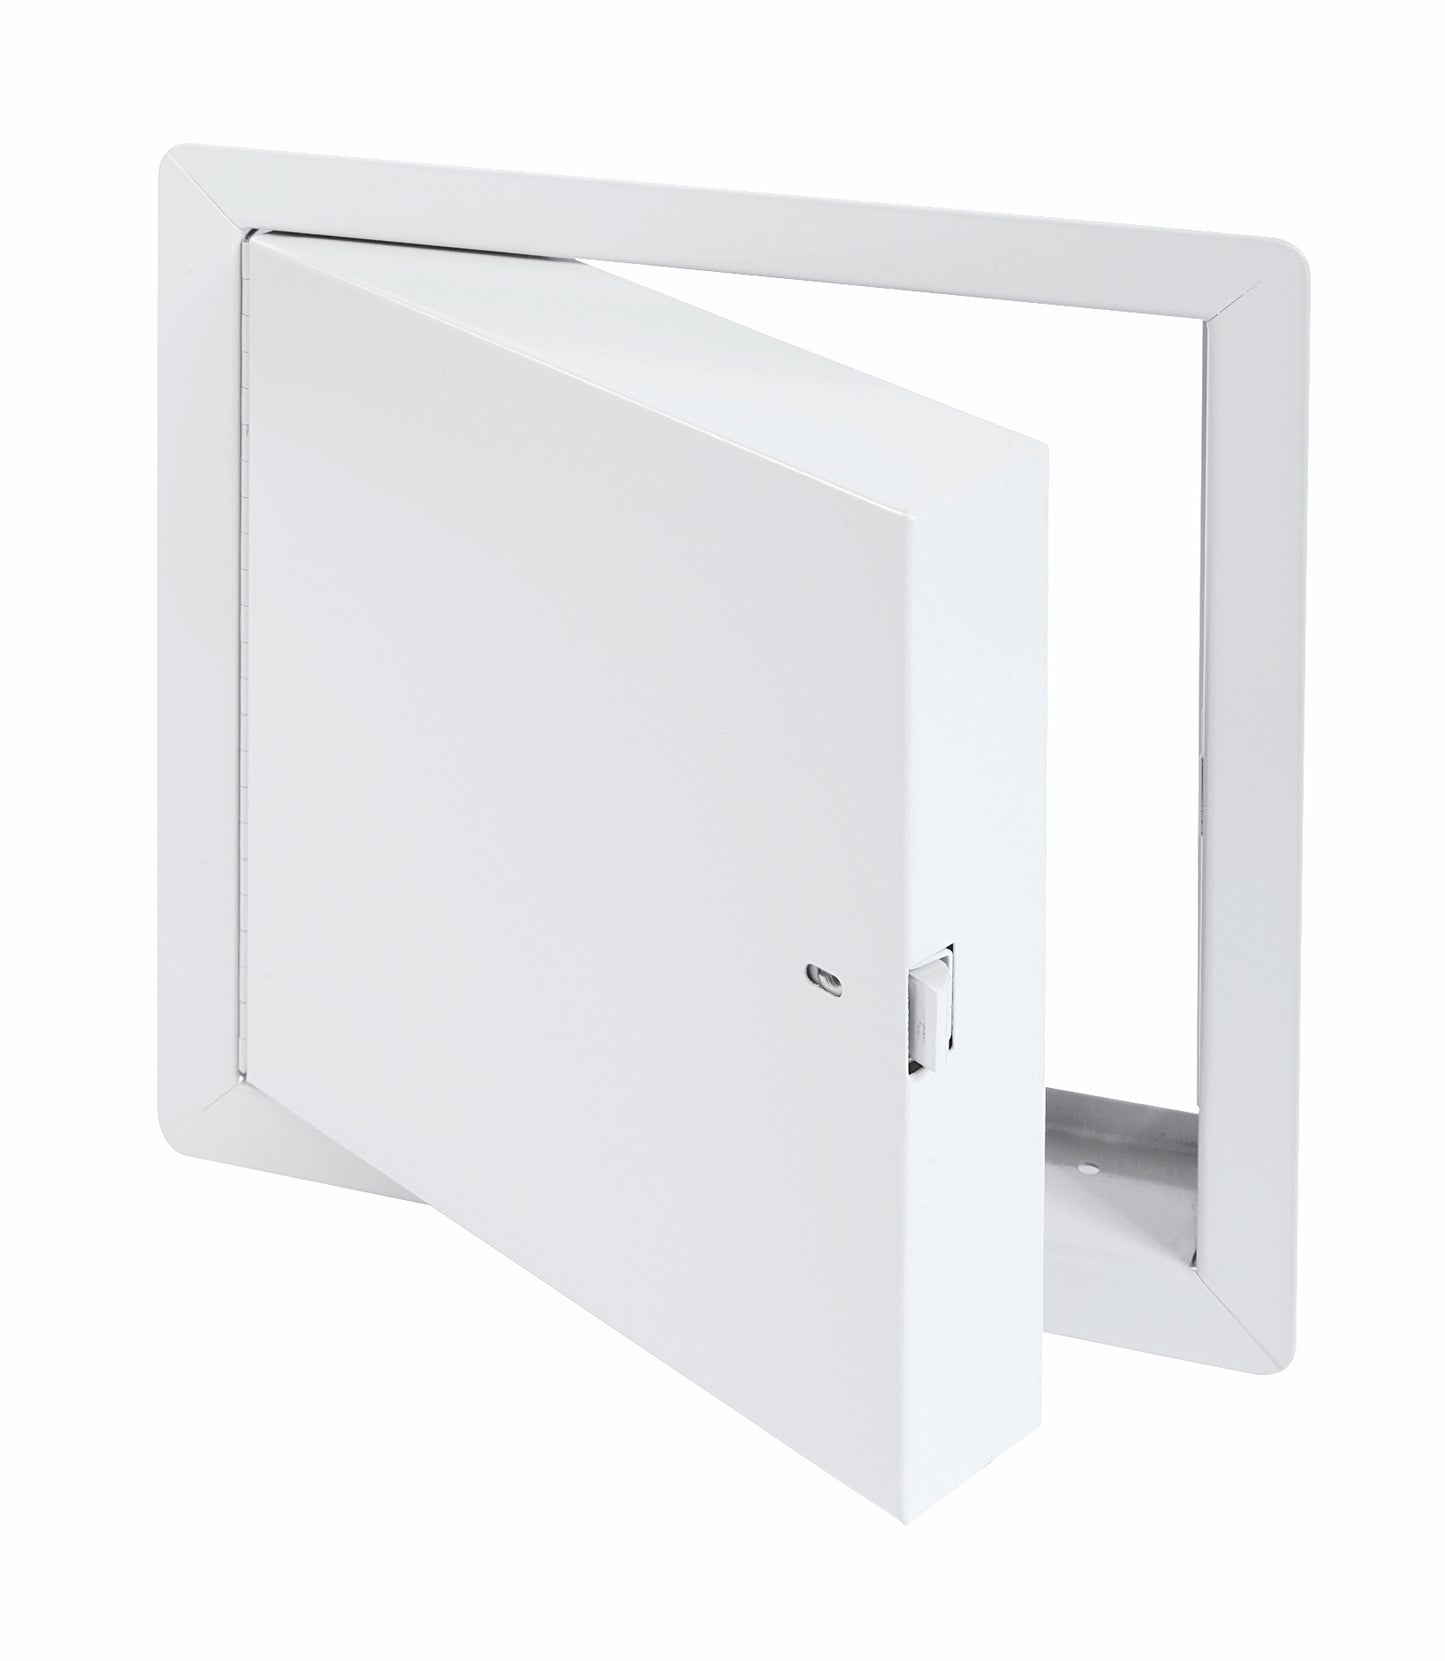 24"x36" Fire-rated Insulated Access Door with Exposed Flange, Cendrex